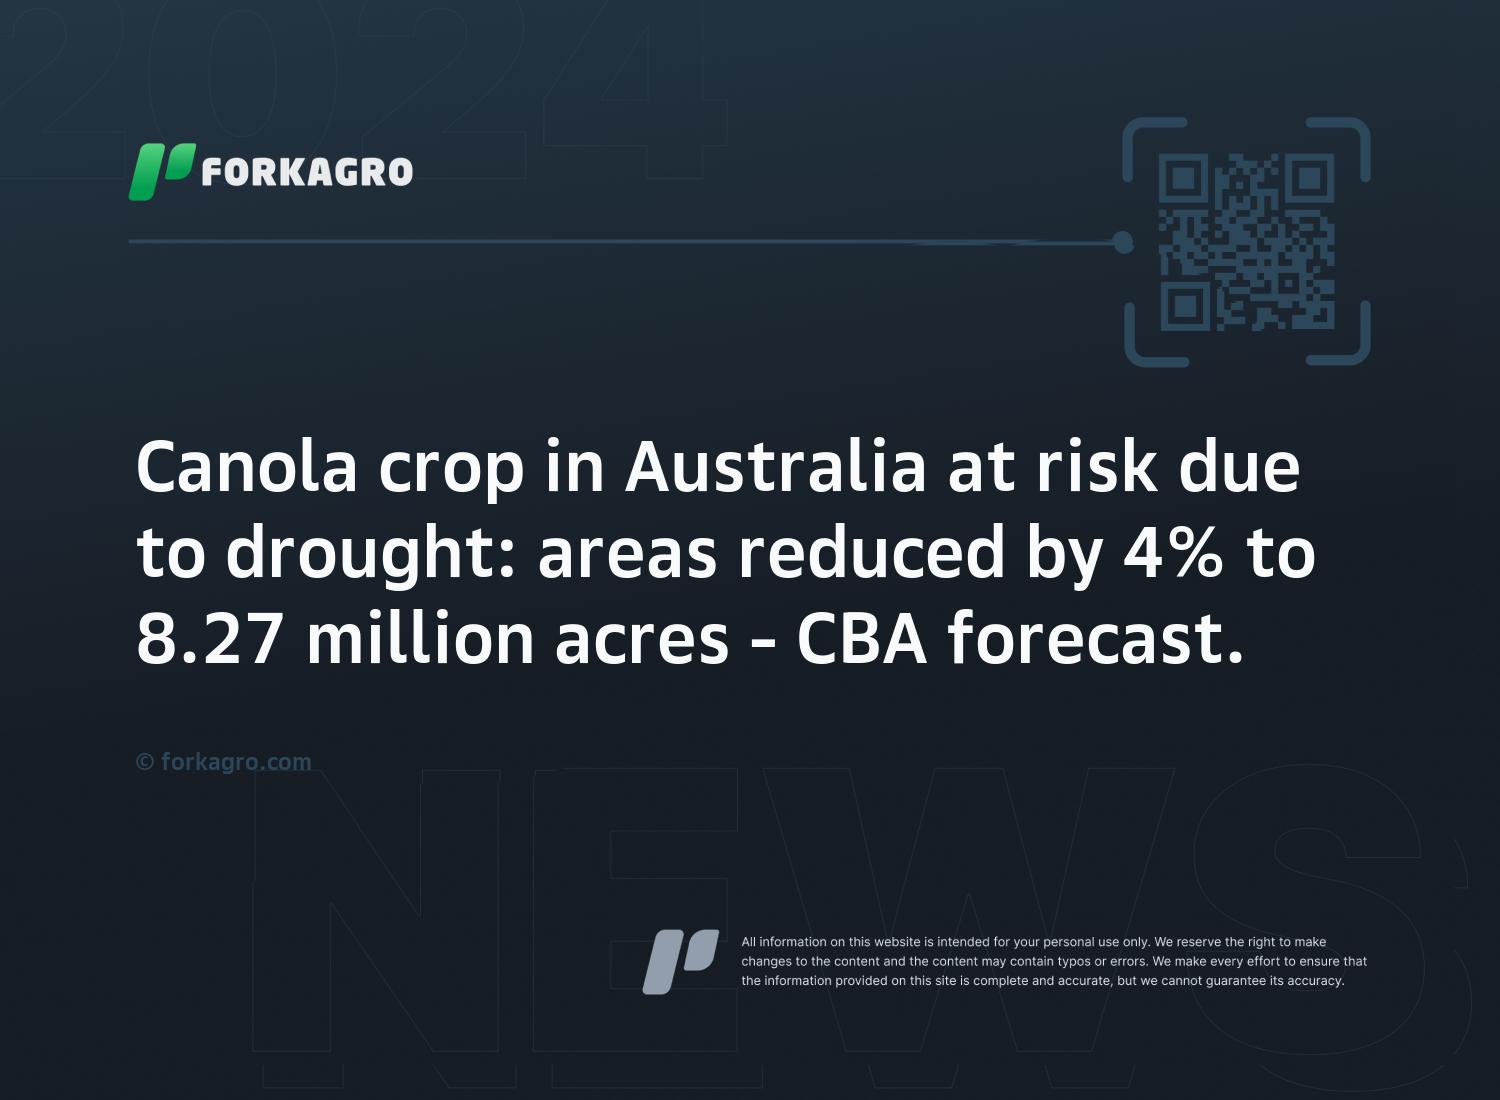 Canola crop in Australia at risk due to drought: areas reduced by 4% to 8.27 million acres - CBA forecast.